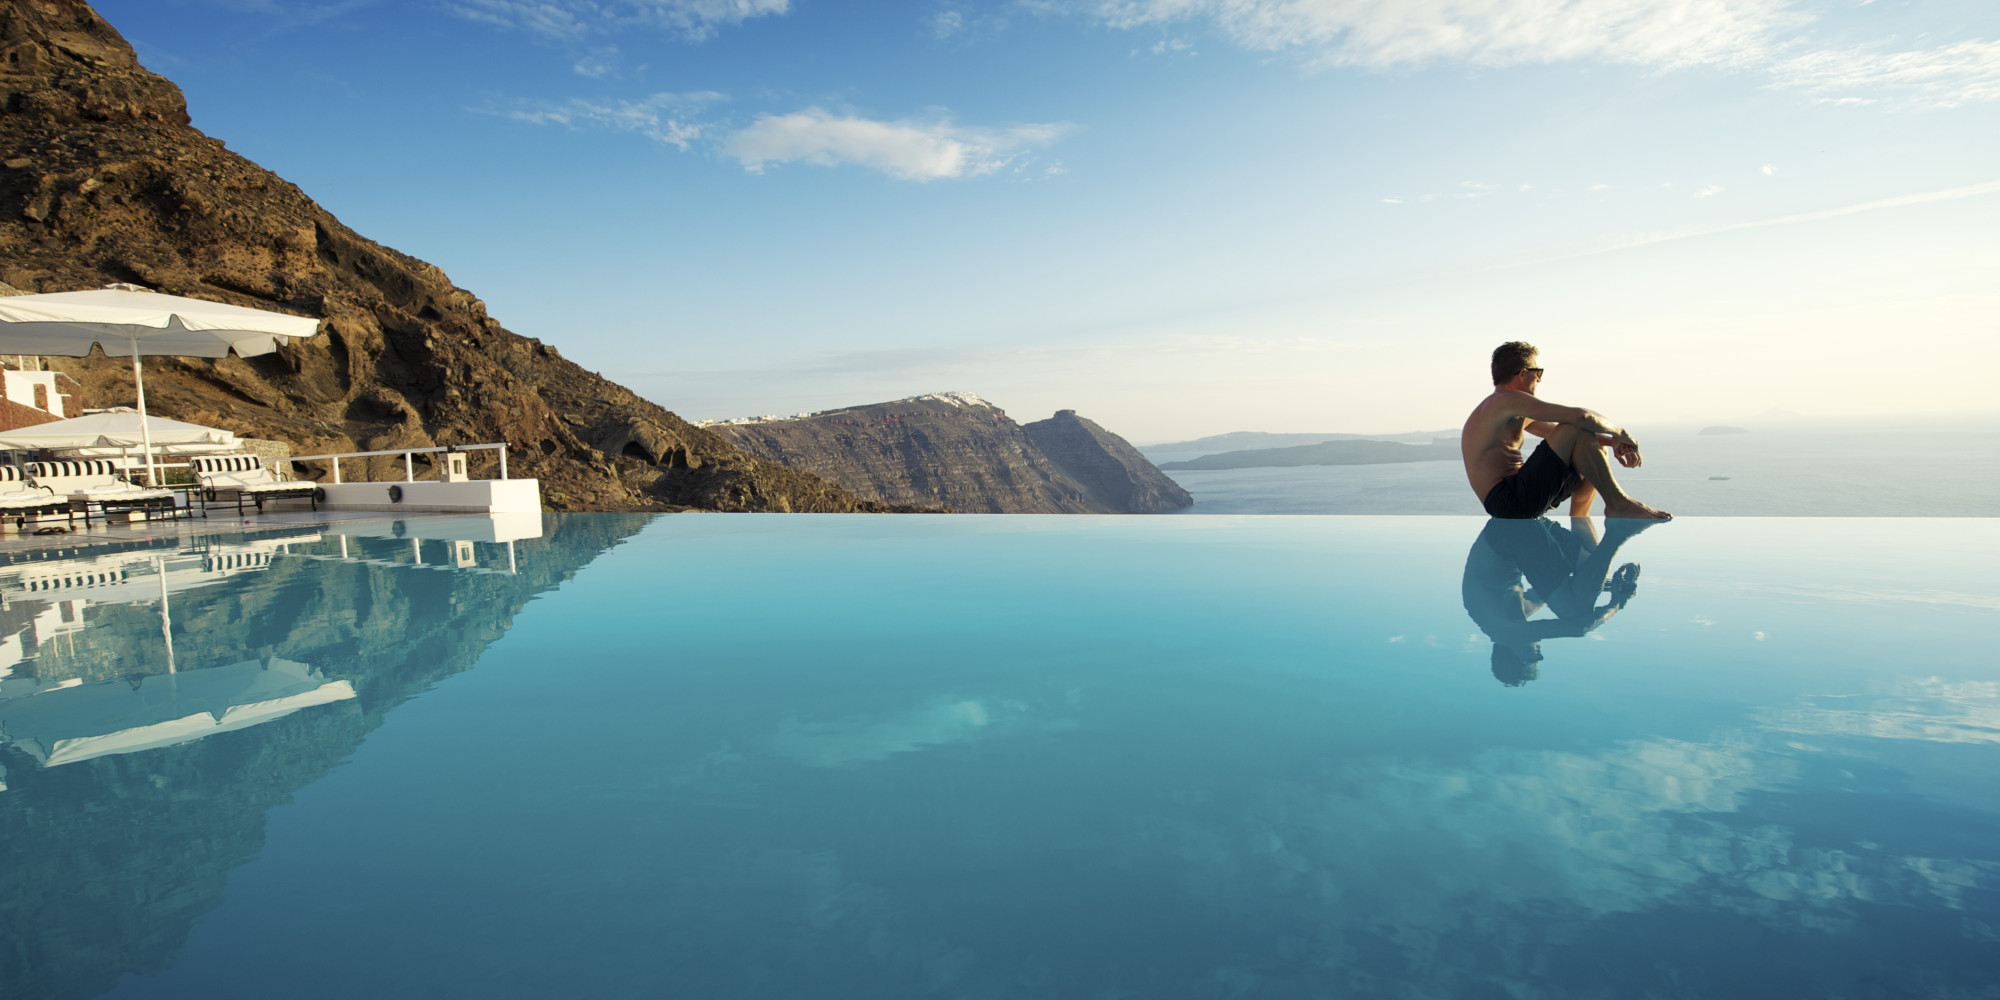 infinity pool 8 infinity pools you have to see to believe | huffpost UCPHOFW